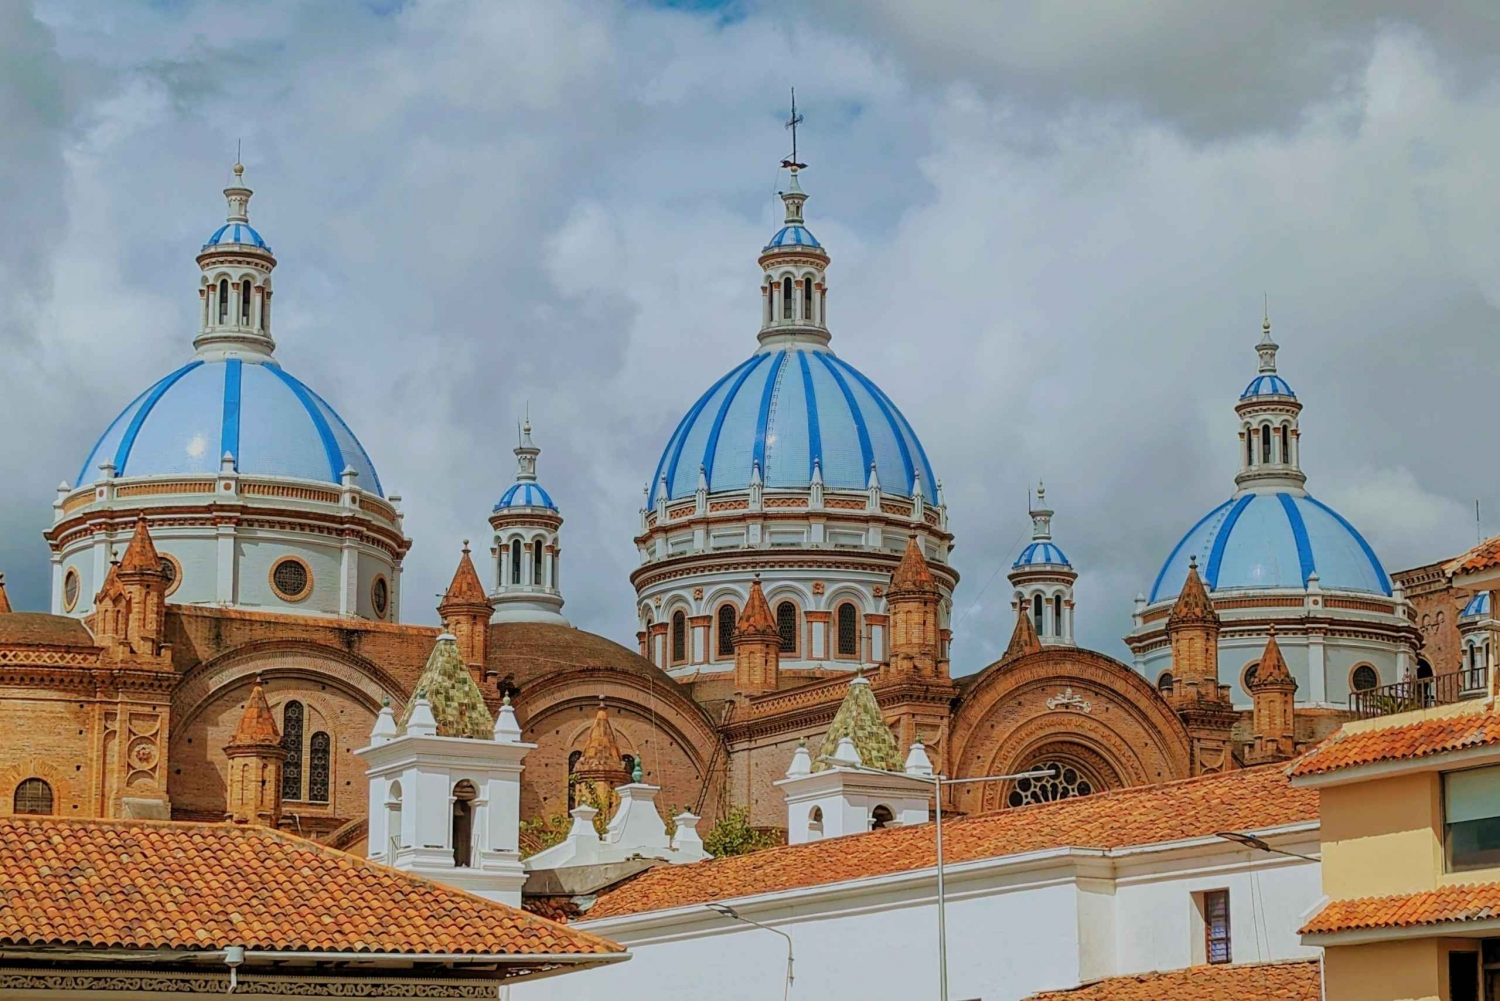 Experience Cuenca: Historical City Tour